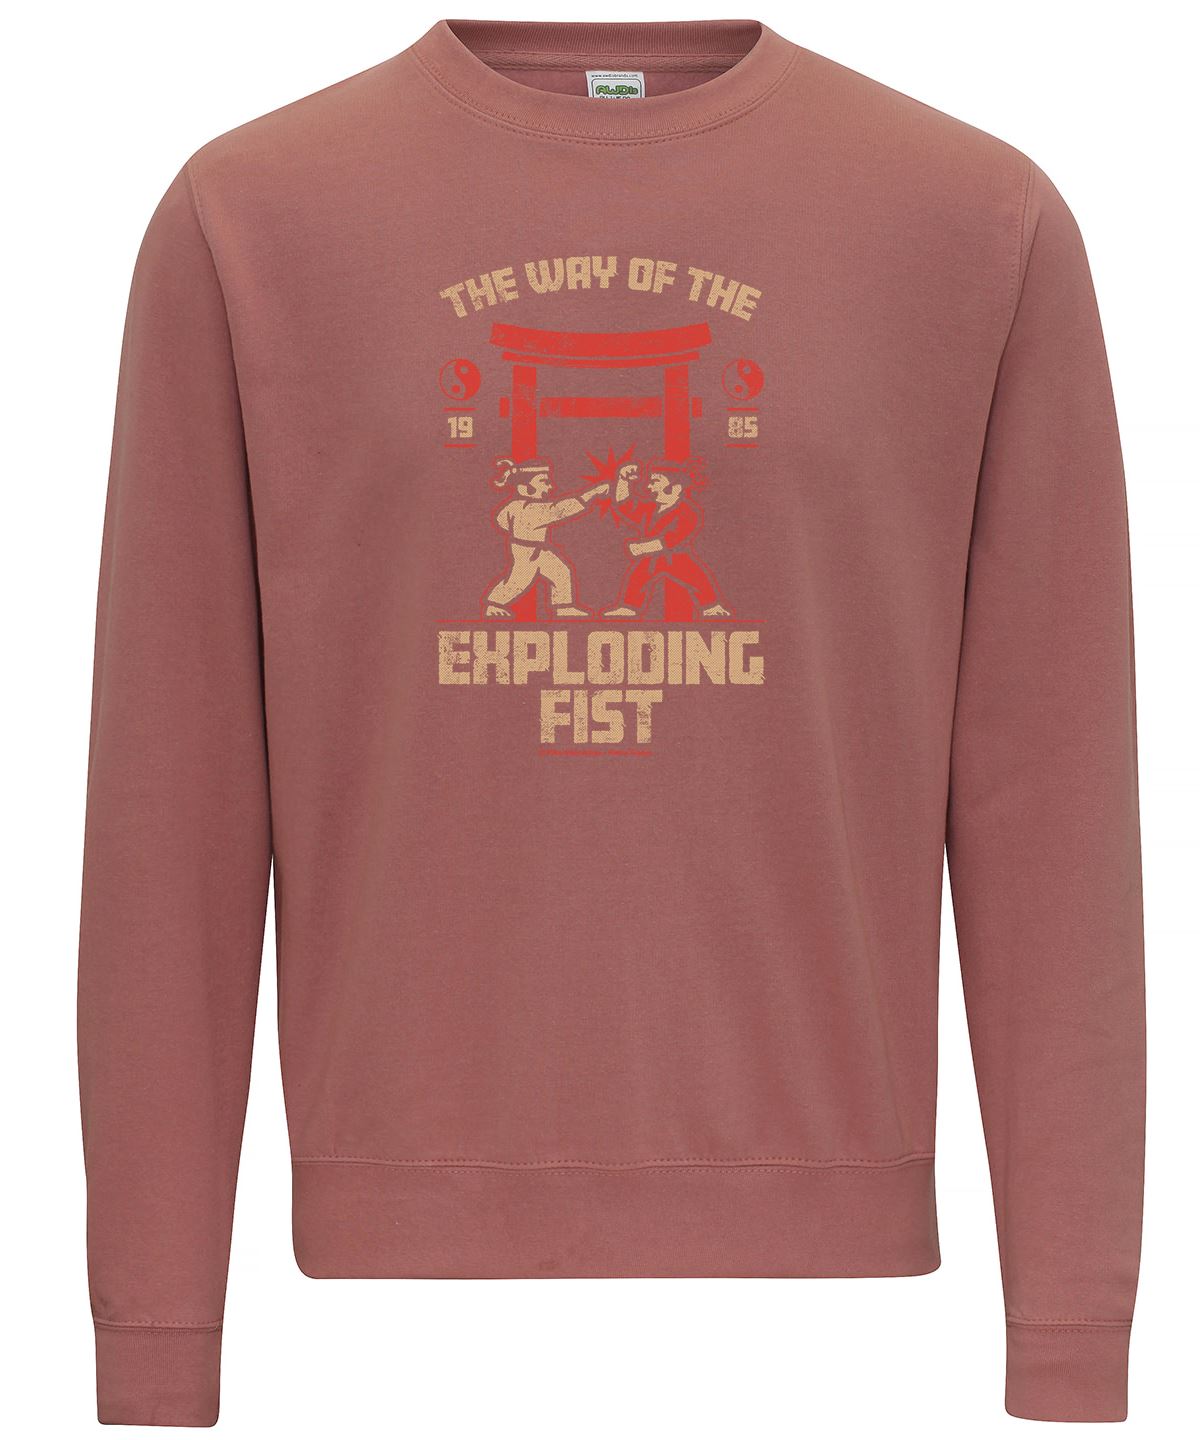 Way Of The Exploding Fist Retro Gaming Sweatshirt Sweatshirt Seven Squared Small Dusty Pink 